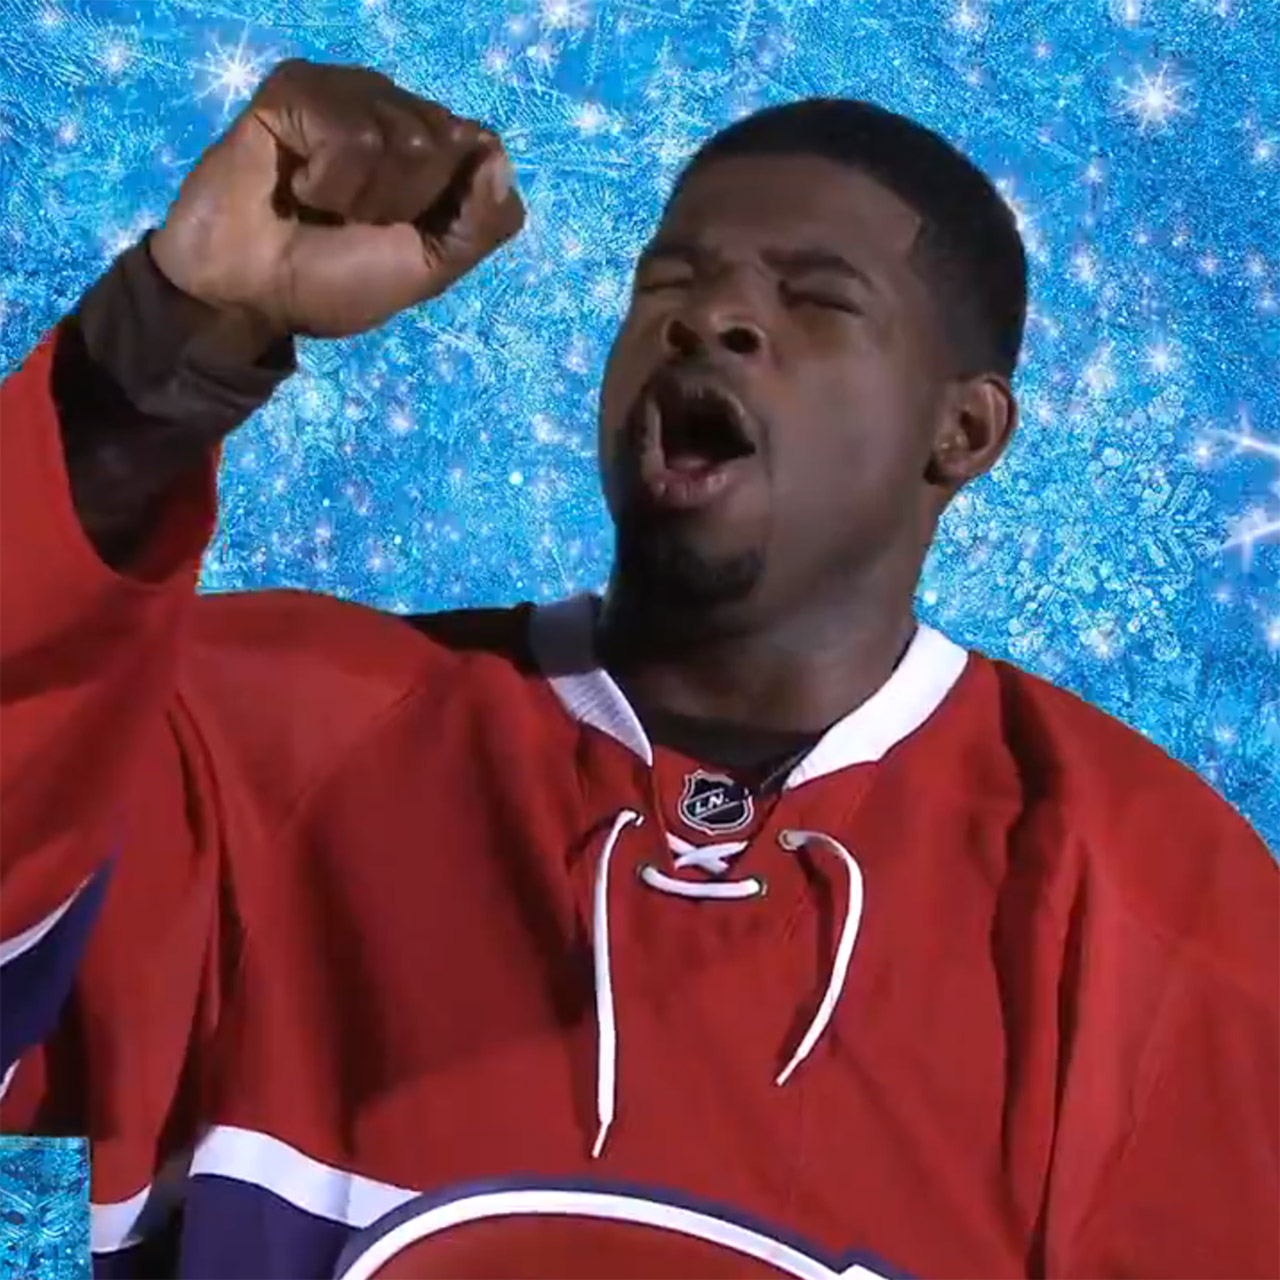 P.K. Subban and the Habs sing "Let it Go" from Disney's 'Frozen'